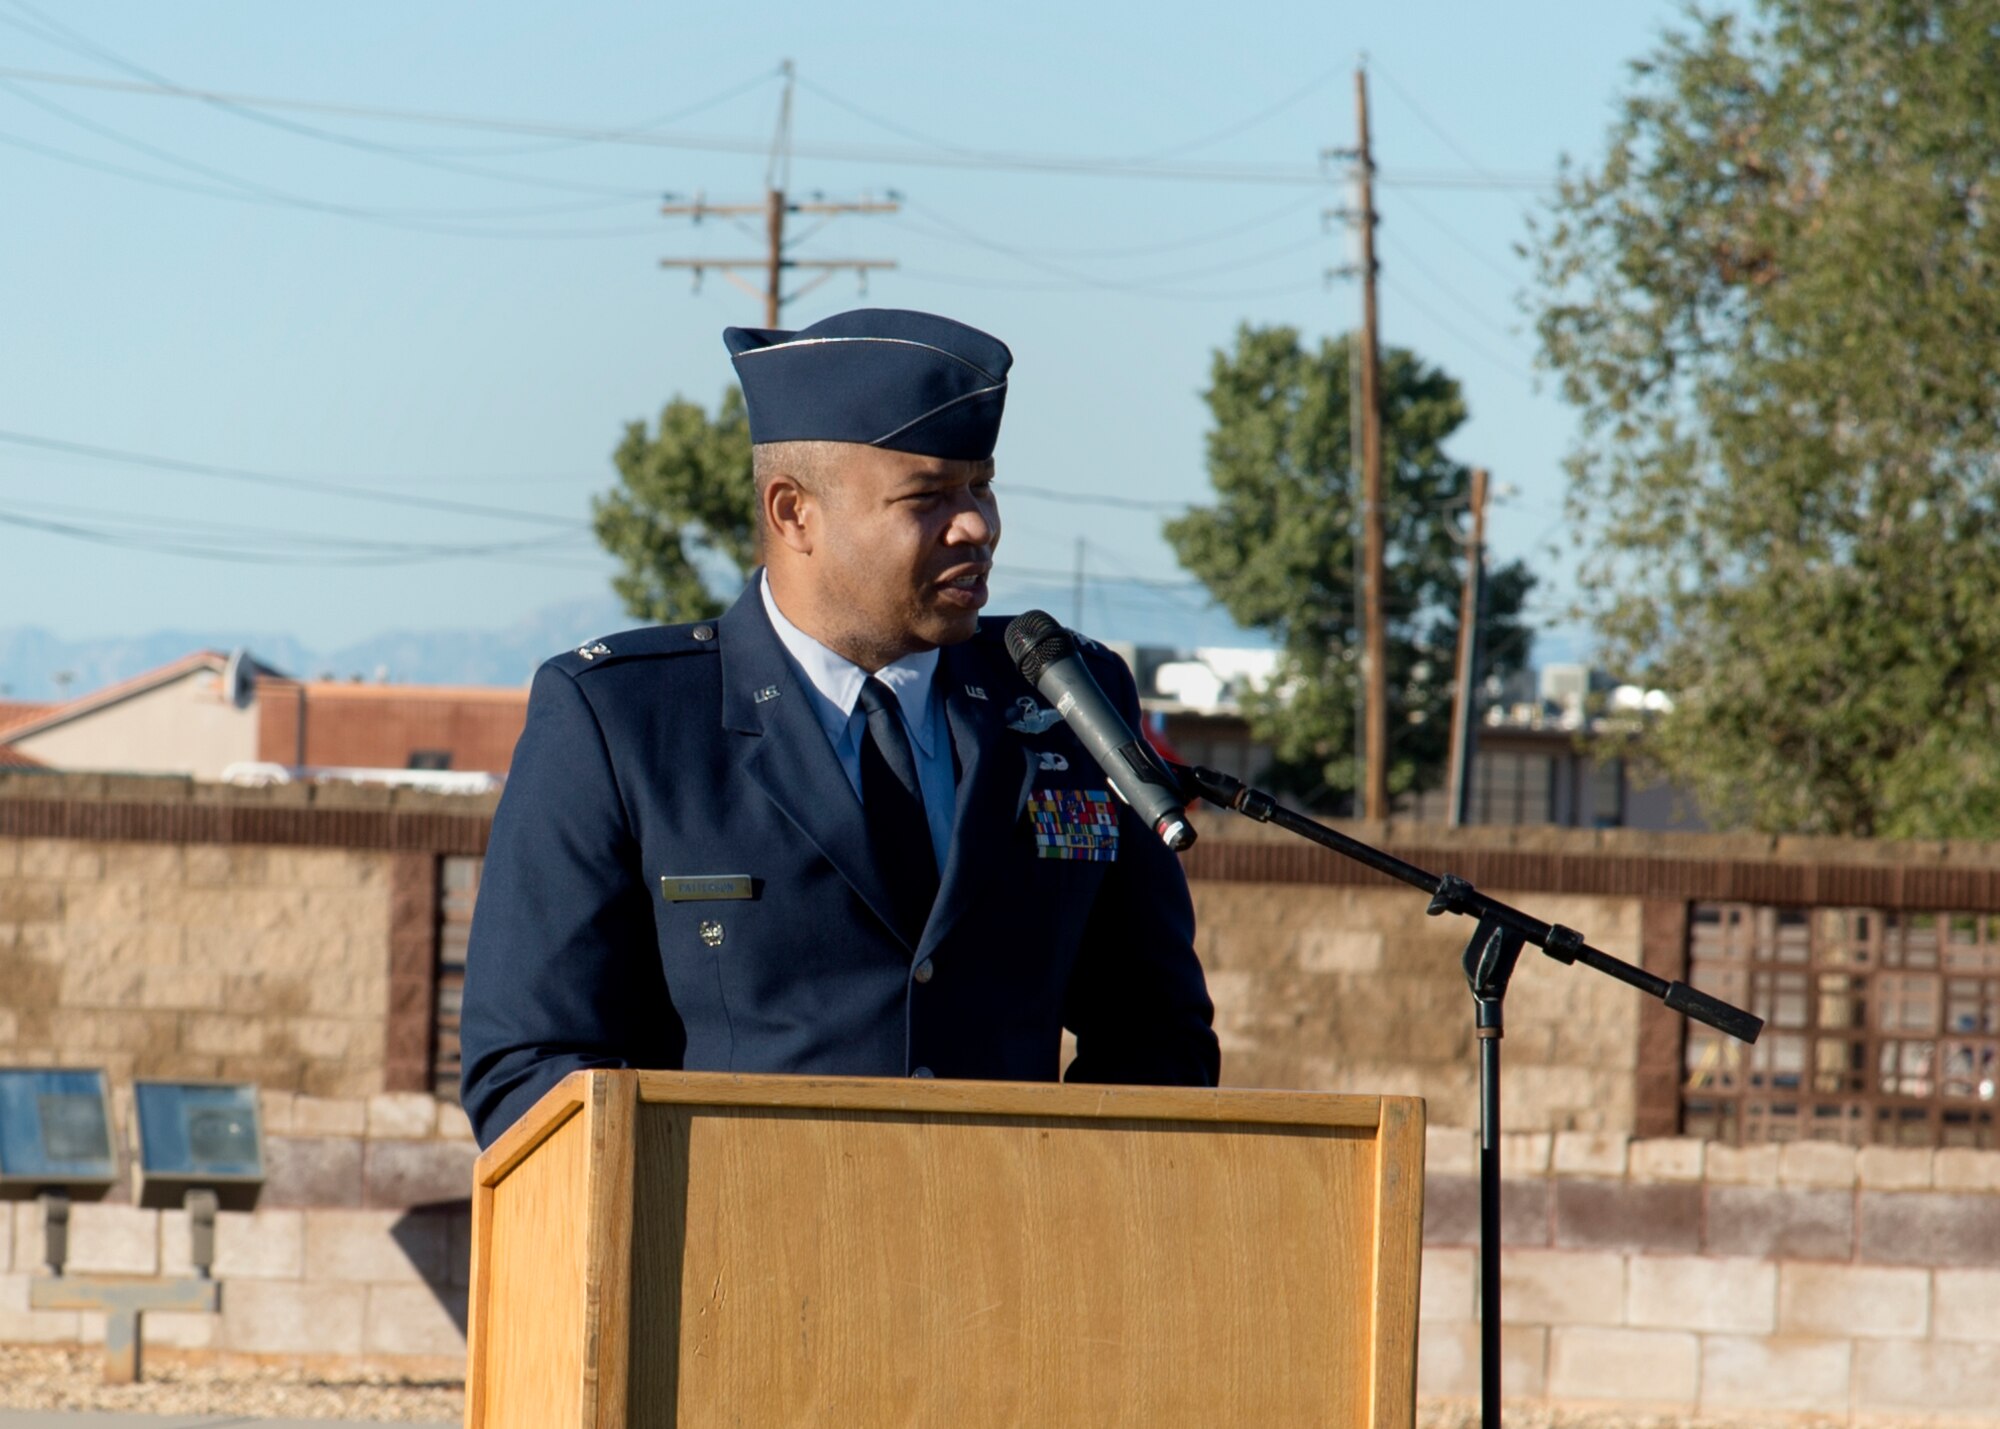 Col. Brian Patterson, 49th Wing vice commander, speaks at the POW/MIA ceremony at Heritage Park on Holloman Air Force Base, N.M., Sept. 21. The ceremony, in rememberance of prisoners-of-war and those still missing-in-action, was part of Holloman's POW/MIA commemoration. (U.S. Air Force photo by Airman 1st Class Kindra Stewart)